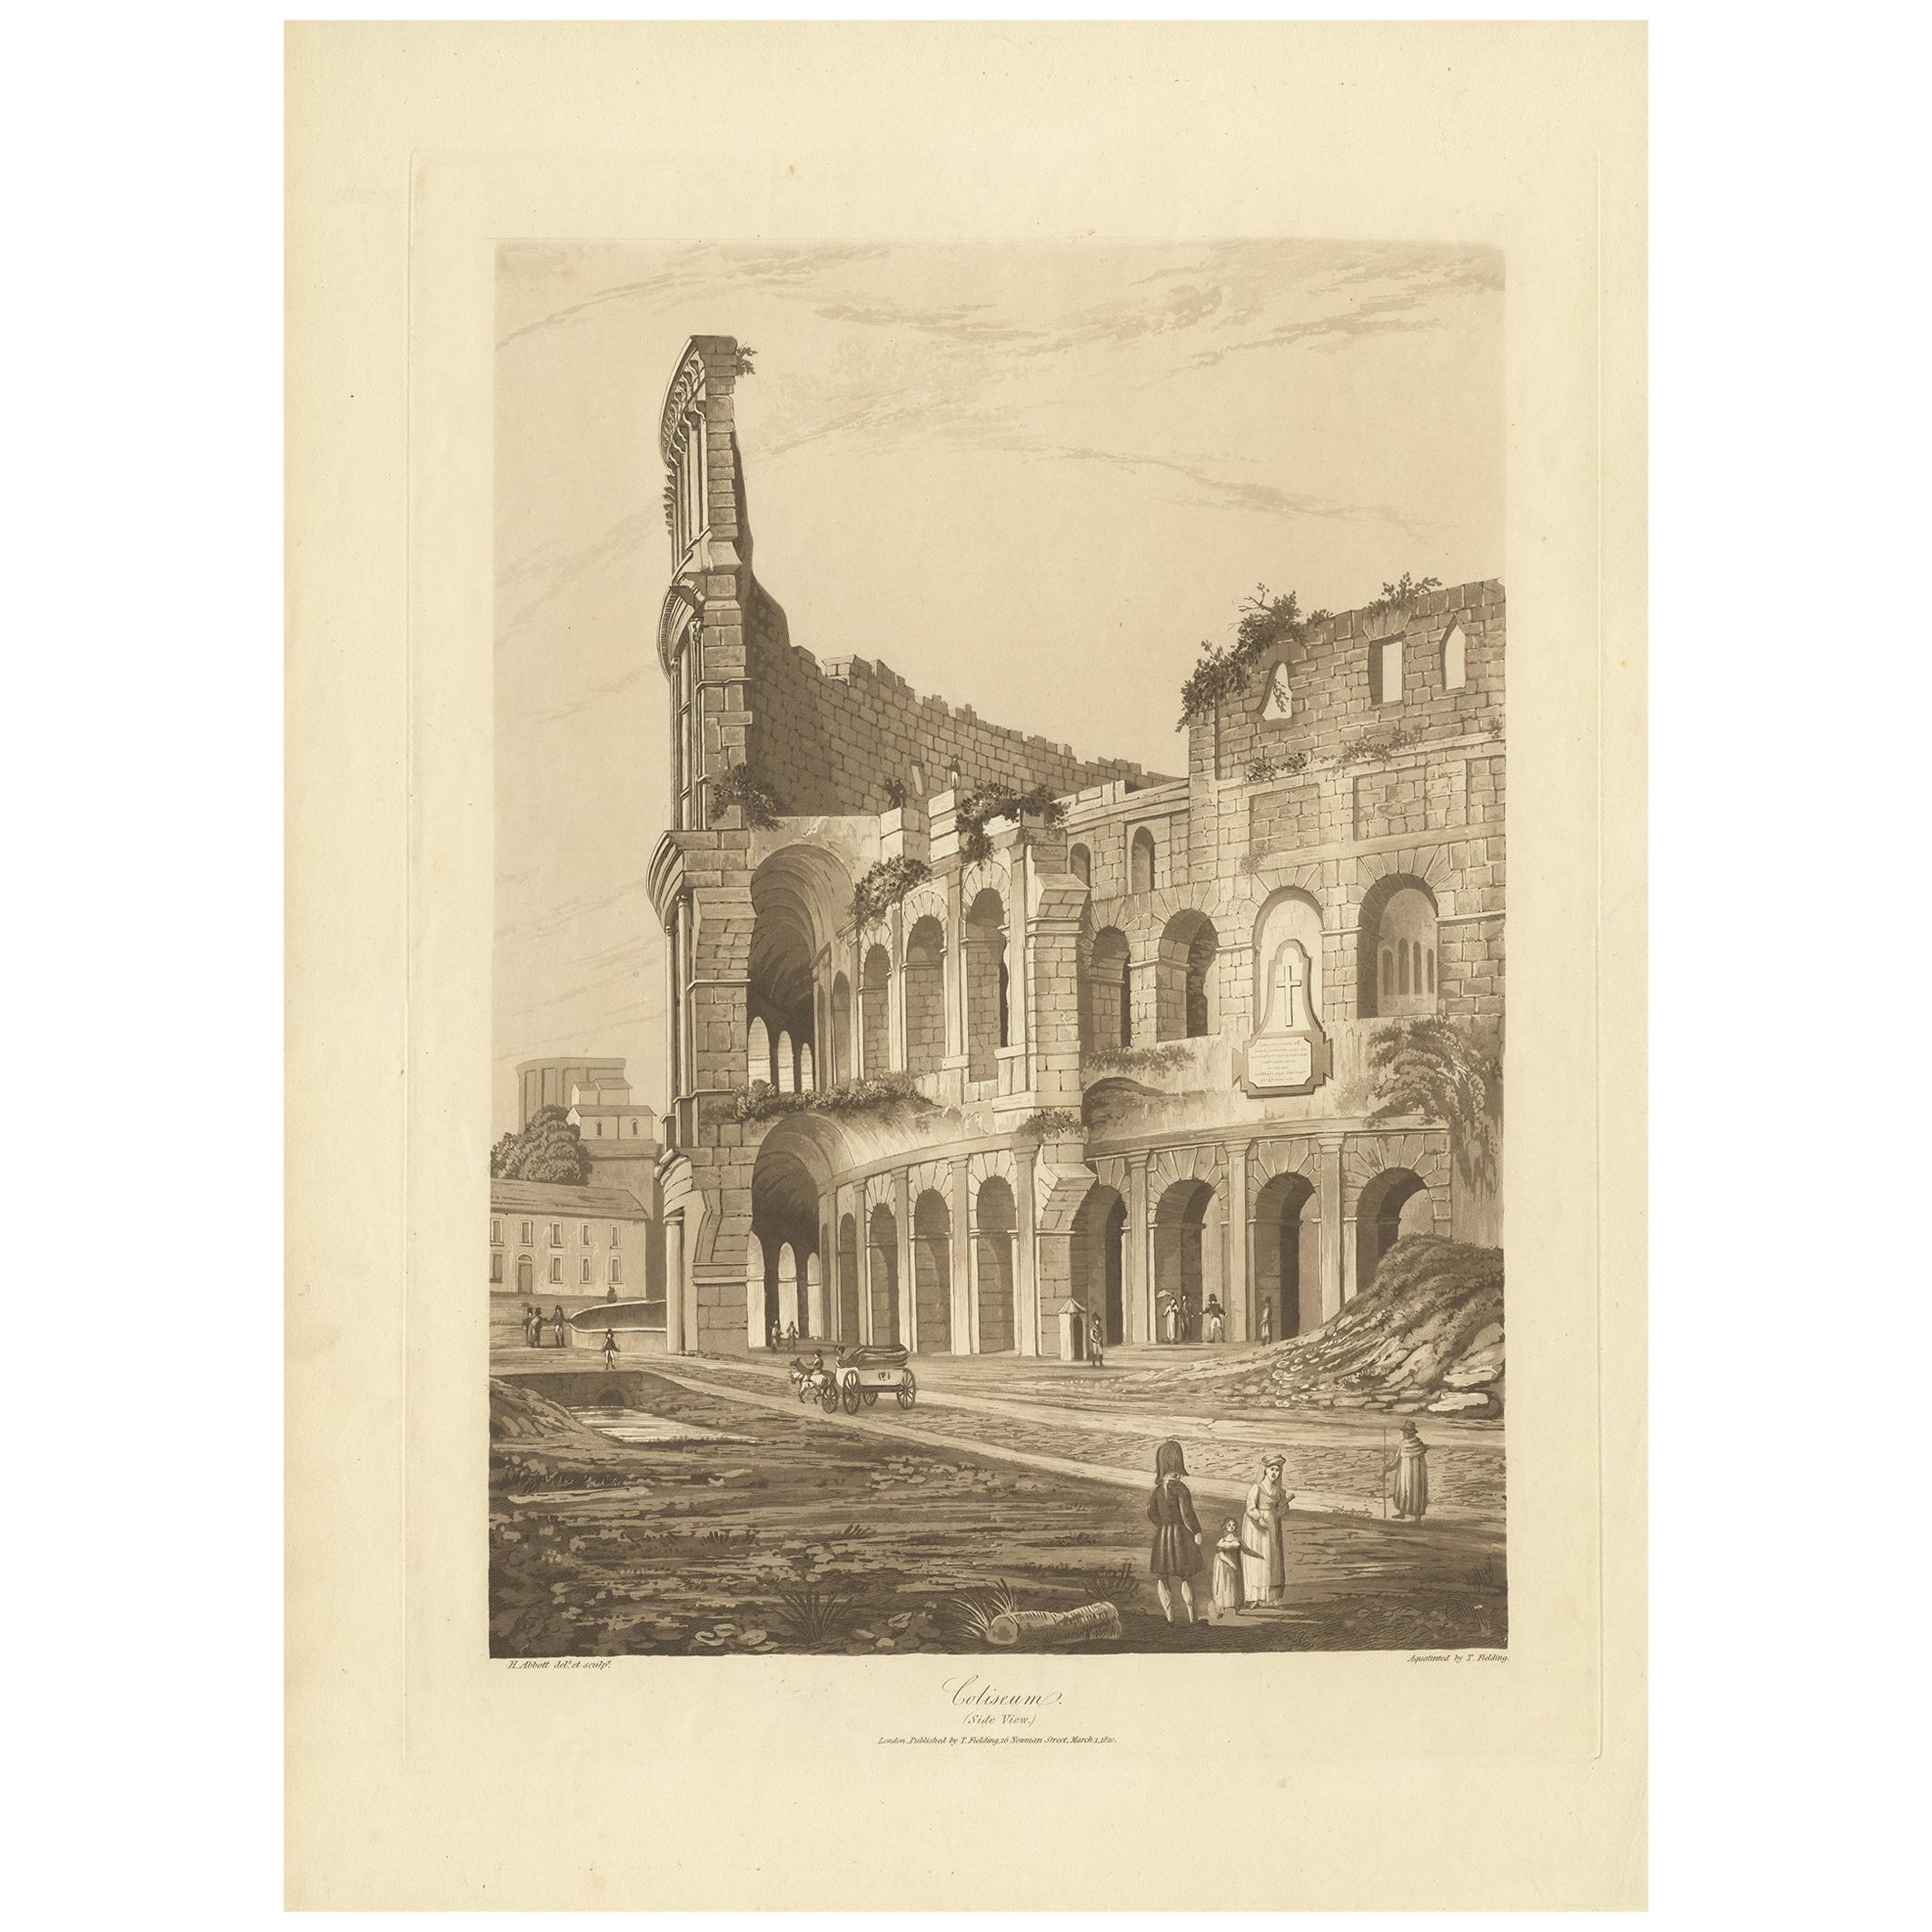 Antique Print of the Colosseum by Abbot, 1820